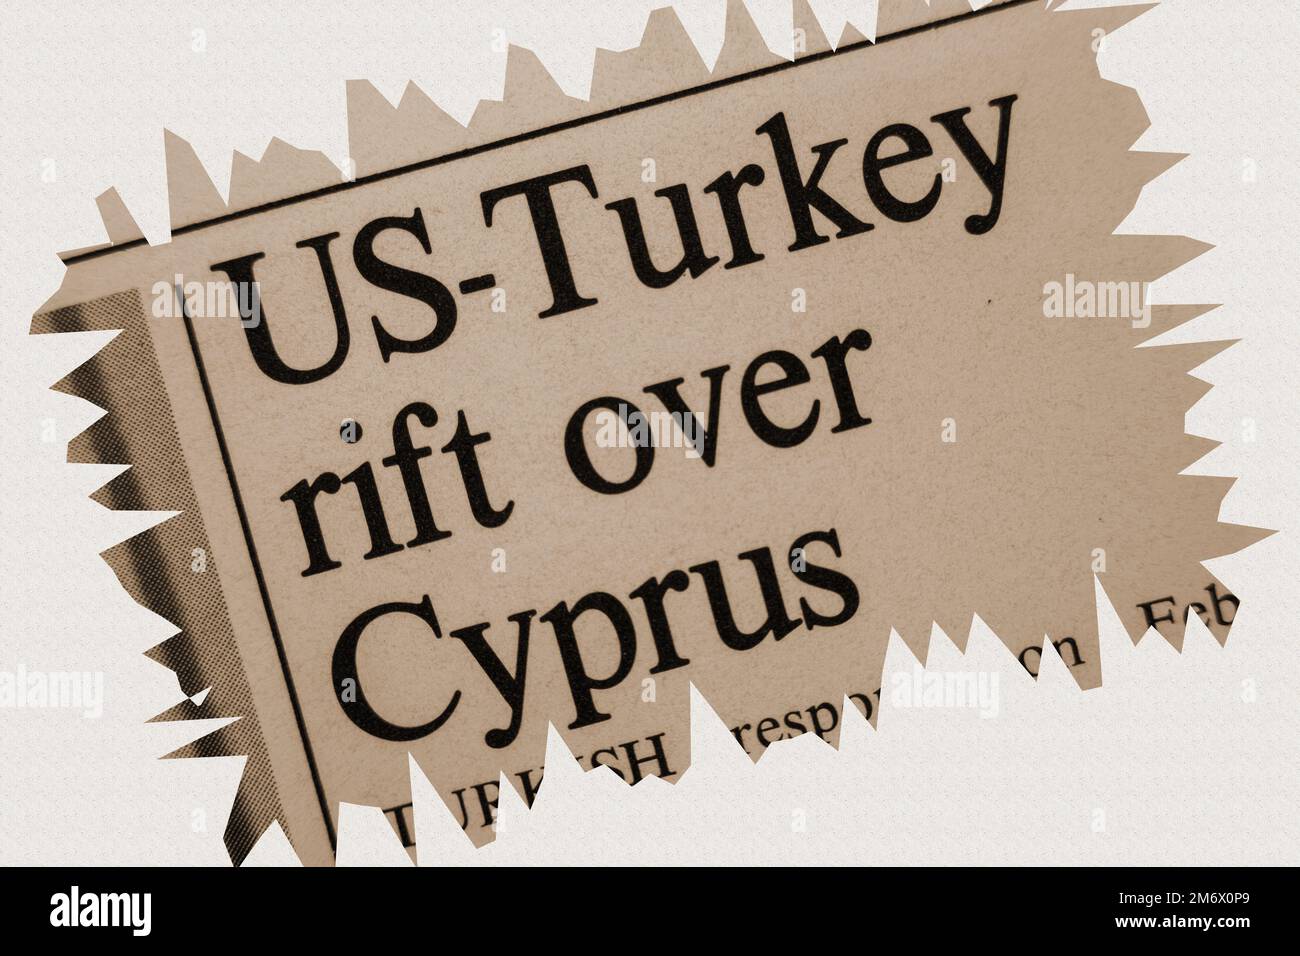 US - Turkey rift over Cyprus - news story from 1975 newspaper headline article title with overlay in sepia Stock Photo